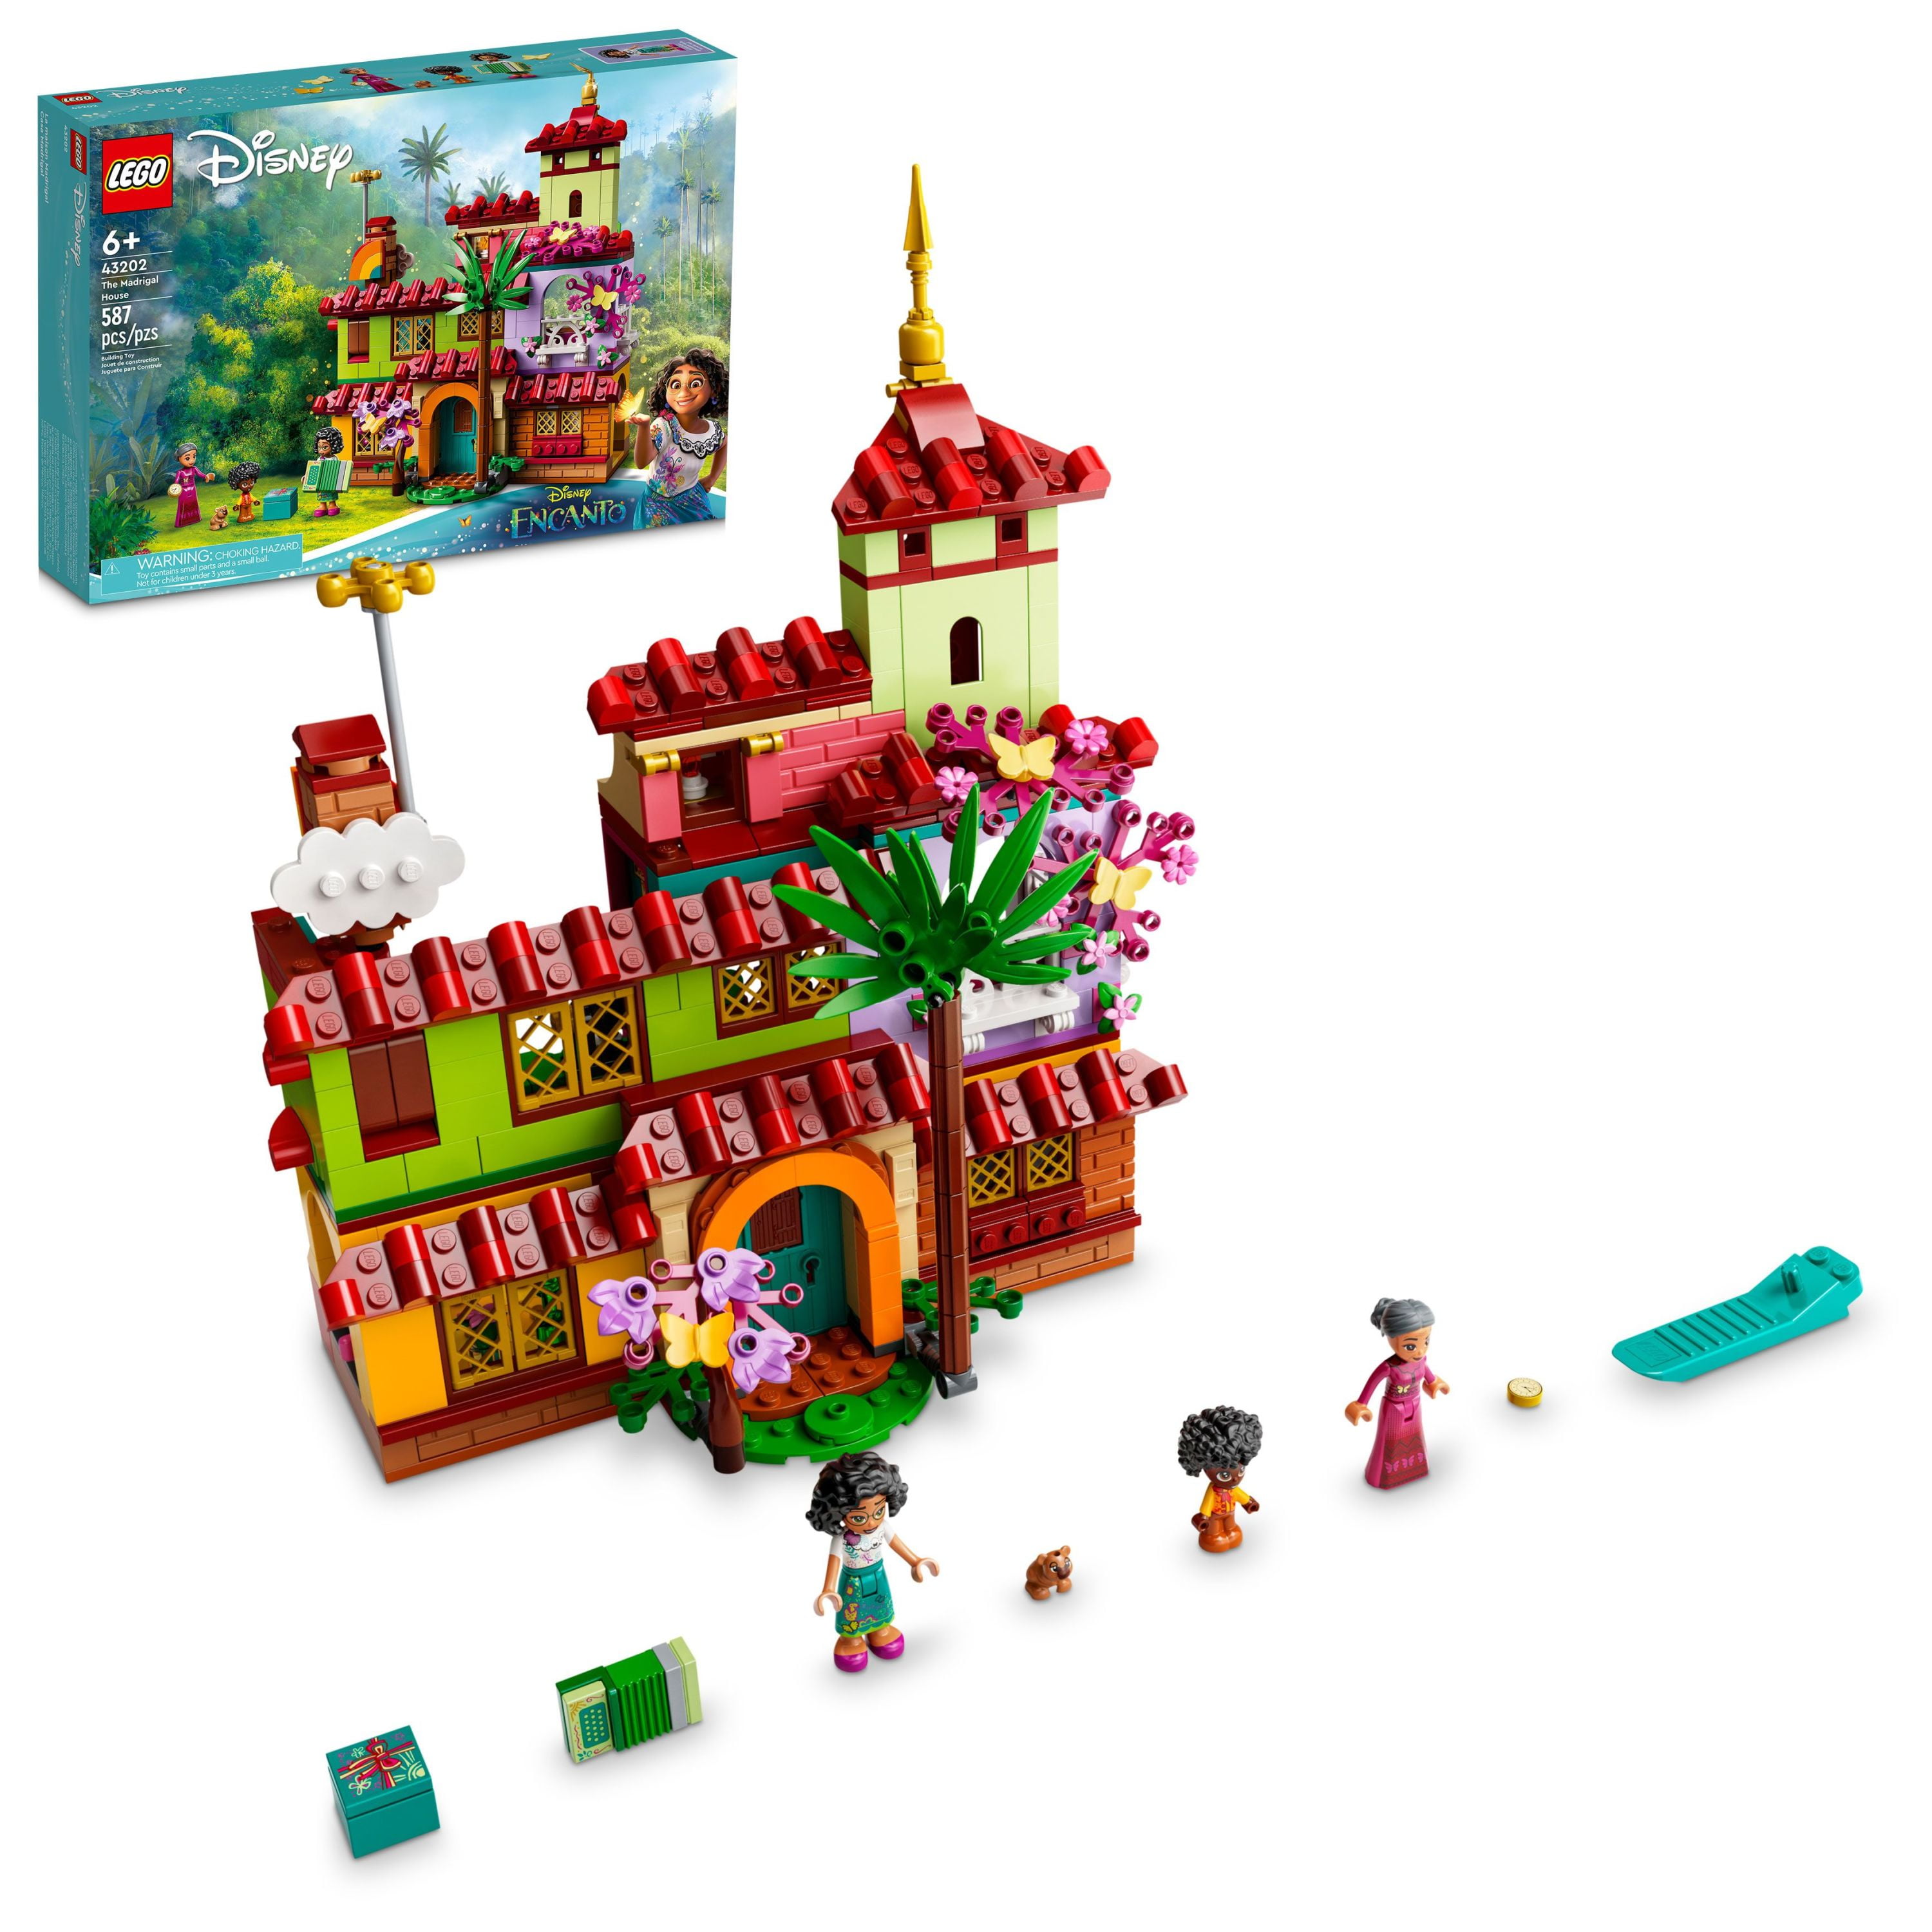 LEGO Disney Encanto The Madrigal House 43202 Building Kit; A Top Gift for Kids Who Love Construction and House (587 - Walmart.com